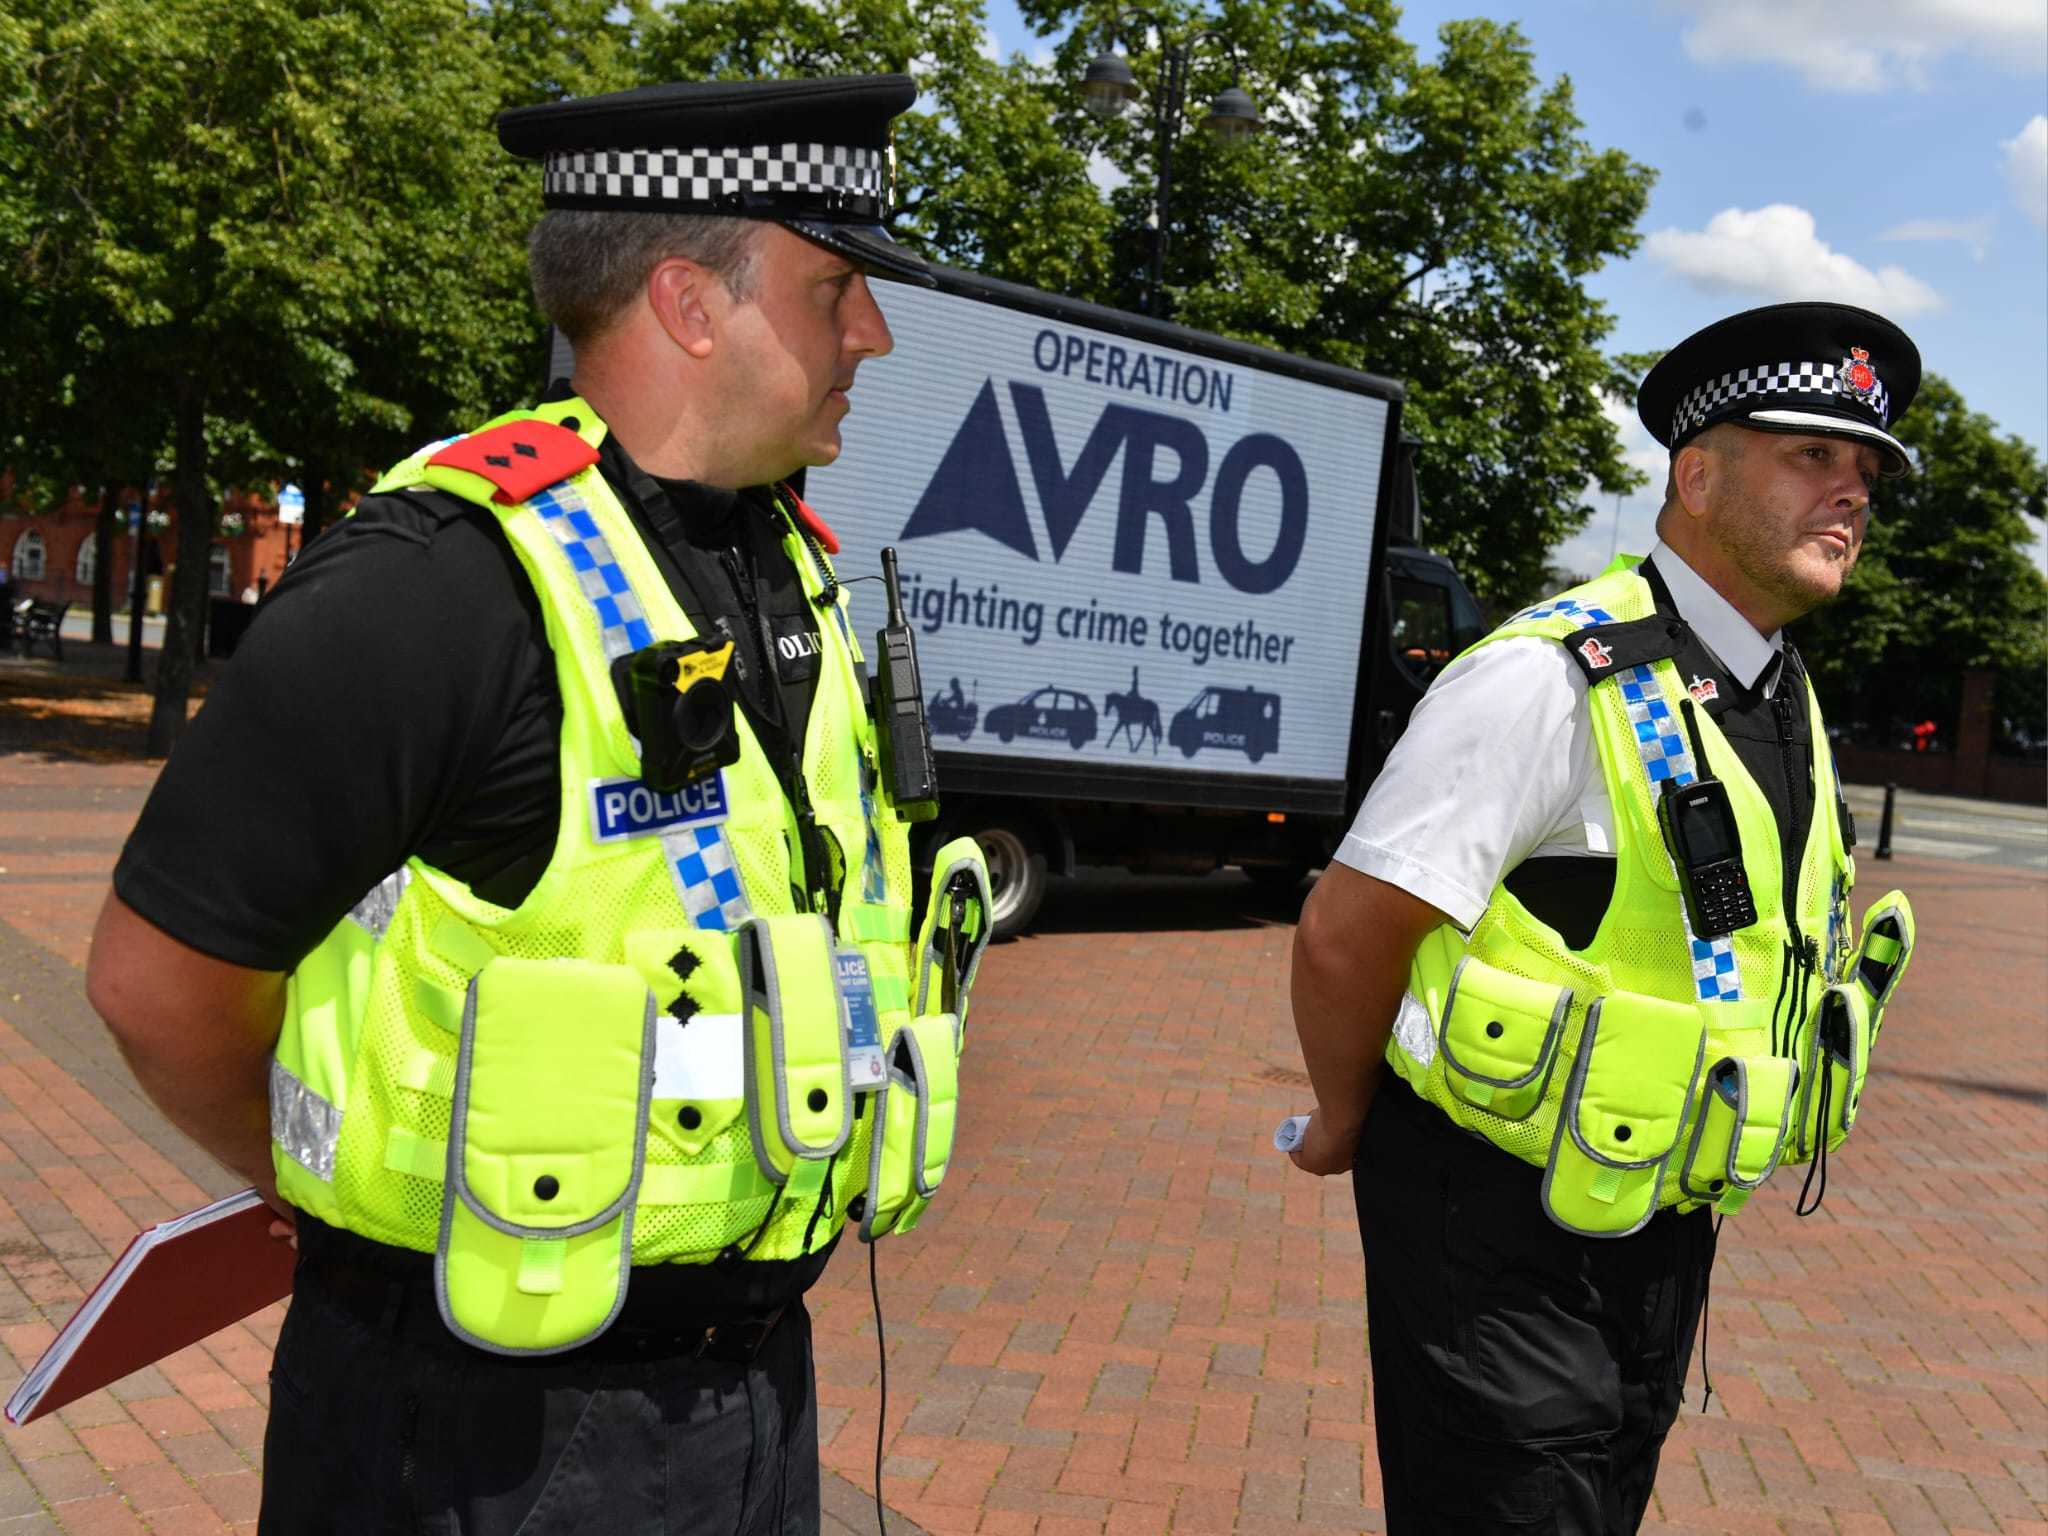 Policr carried out the actiomn as part of Operation AVRO